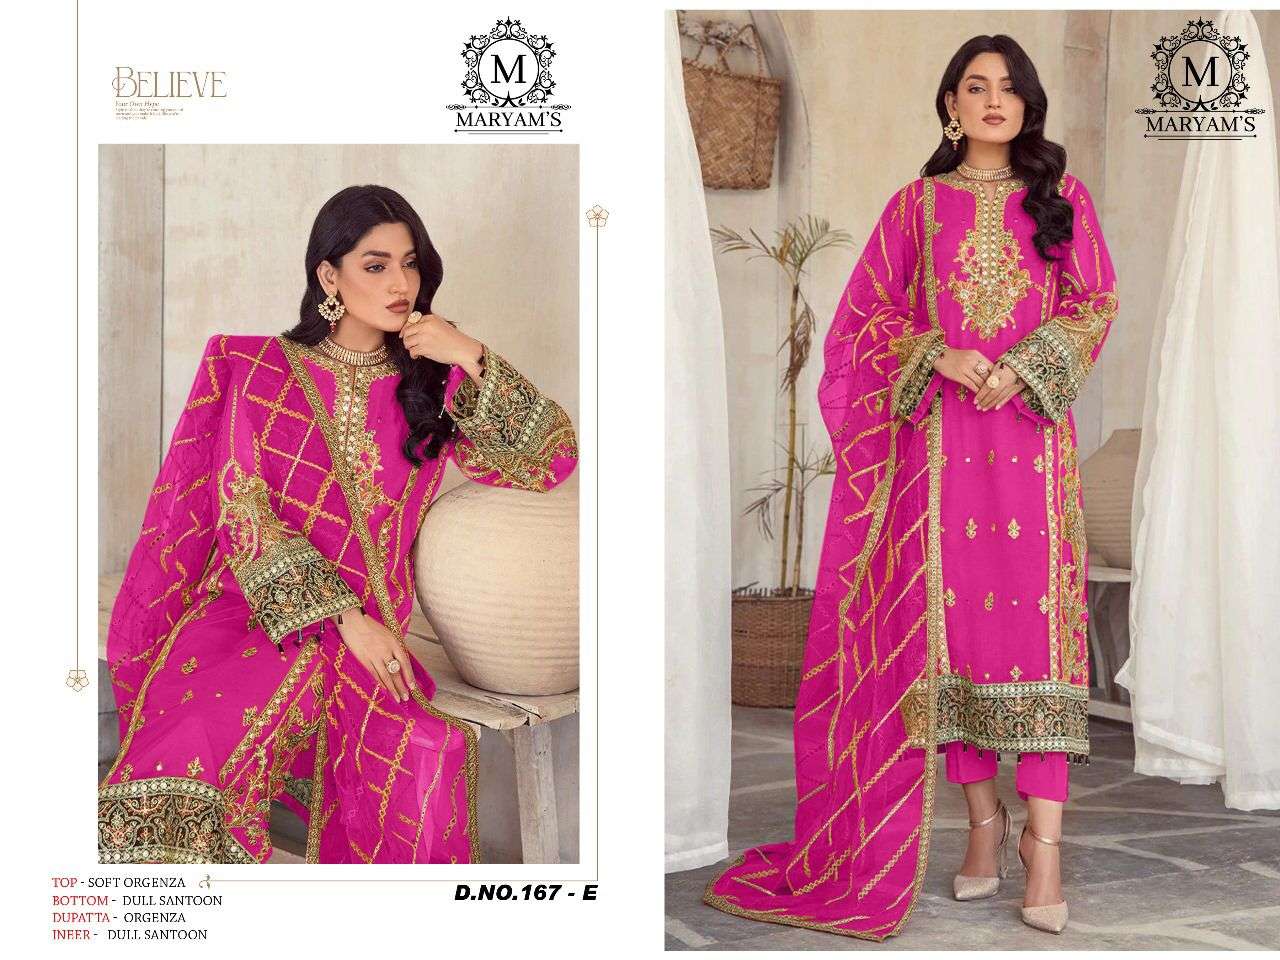 Maryams 167 Organza With Embroidery Salwar Suits Wholesale catalog